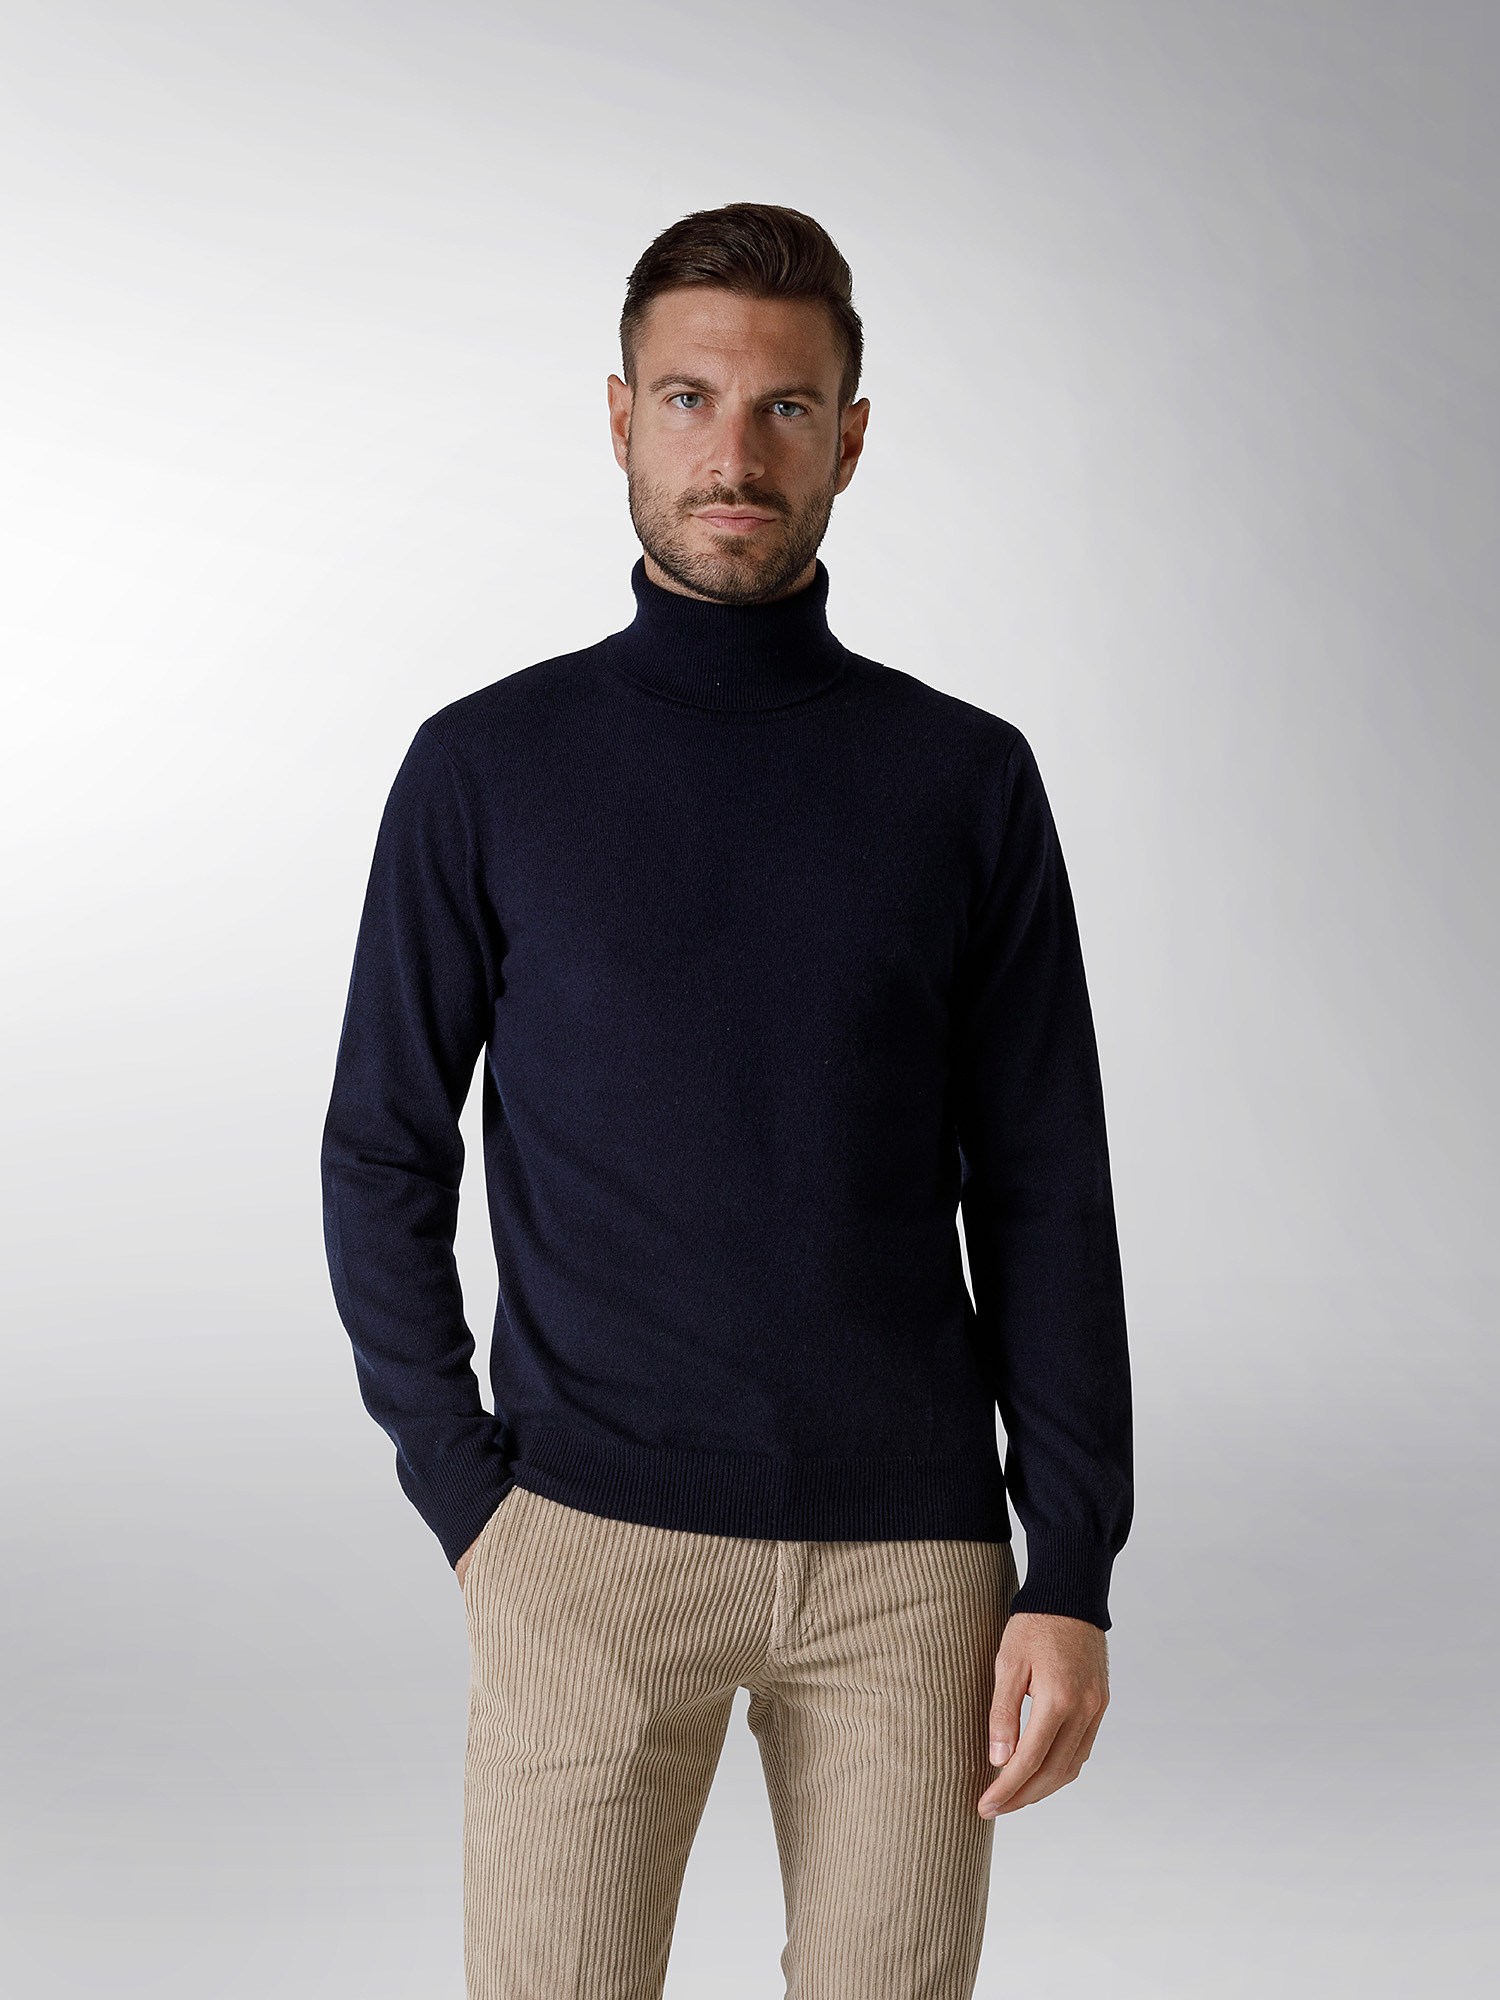 Coin Cashmere - Turtleneck in pure cashmere, Dark Blue, large image number 1